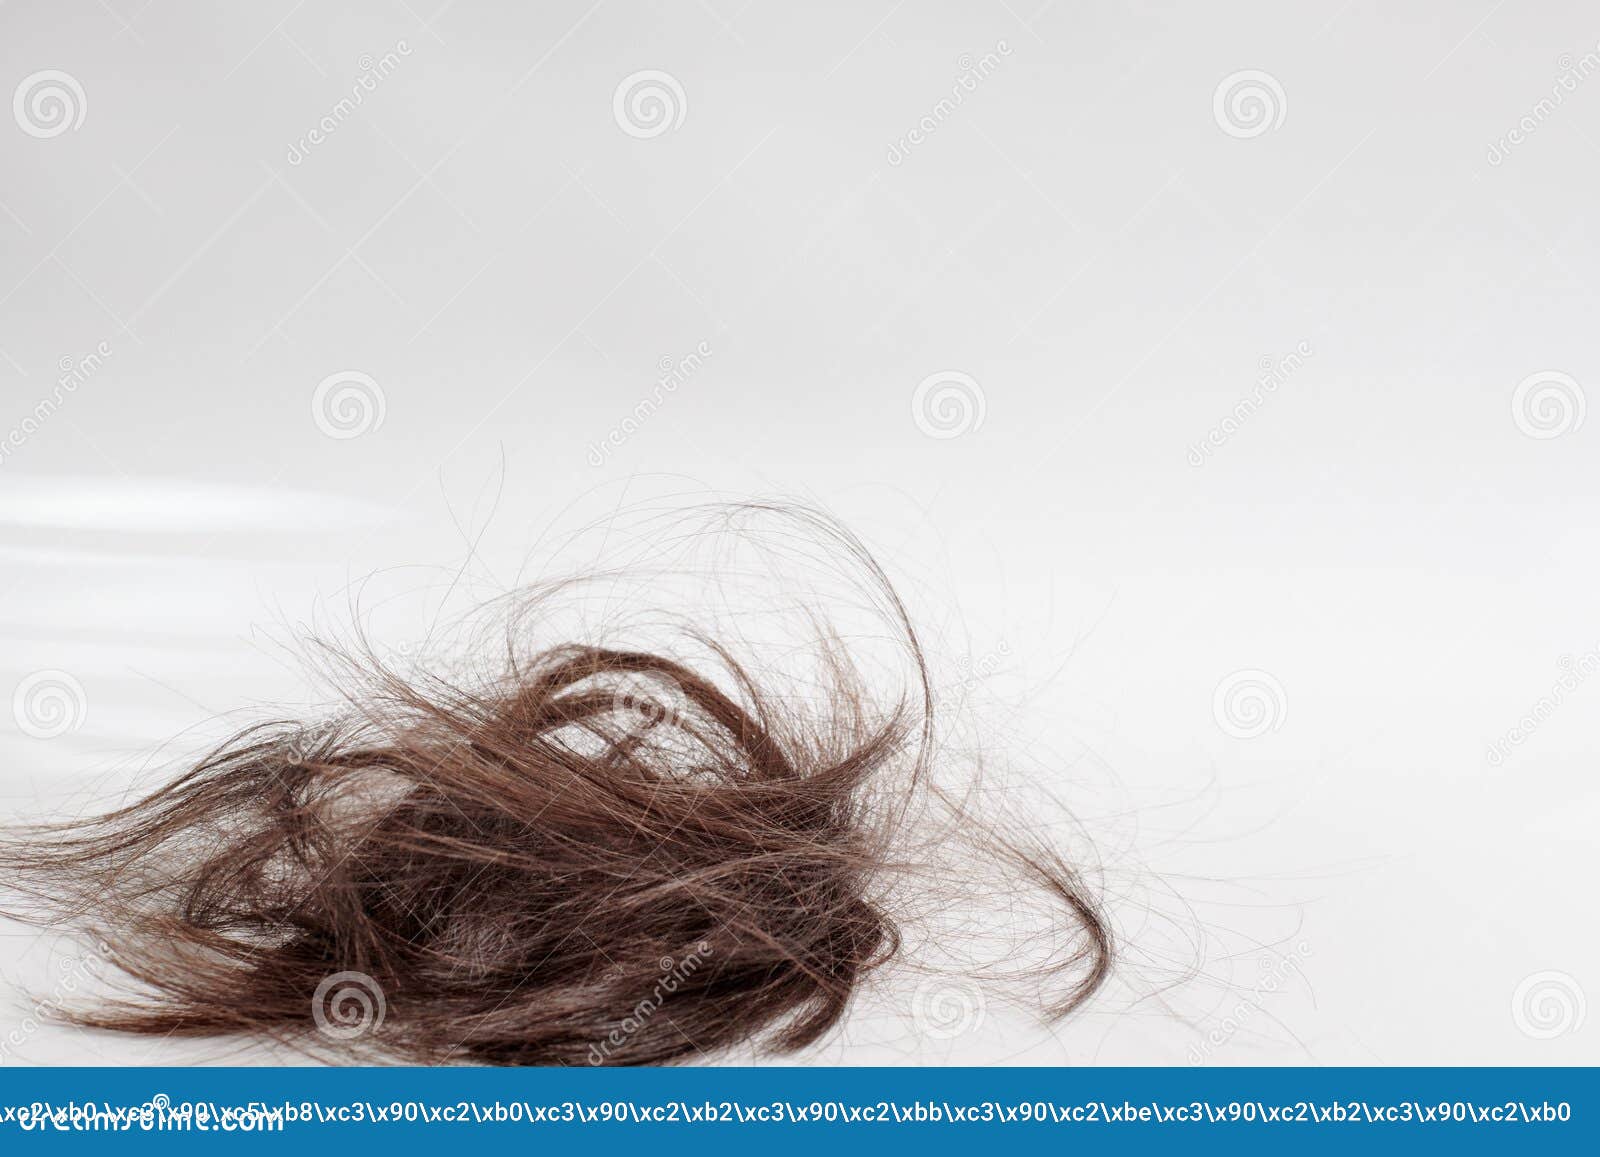 9900 Clump Of Hair Stock Photos Pictures  RoyaltyFree Images  iStock   Hair ball Hair loss Hairball